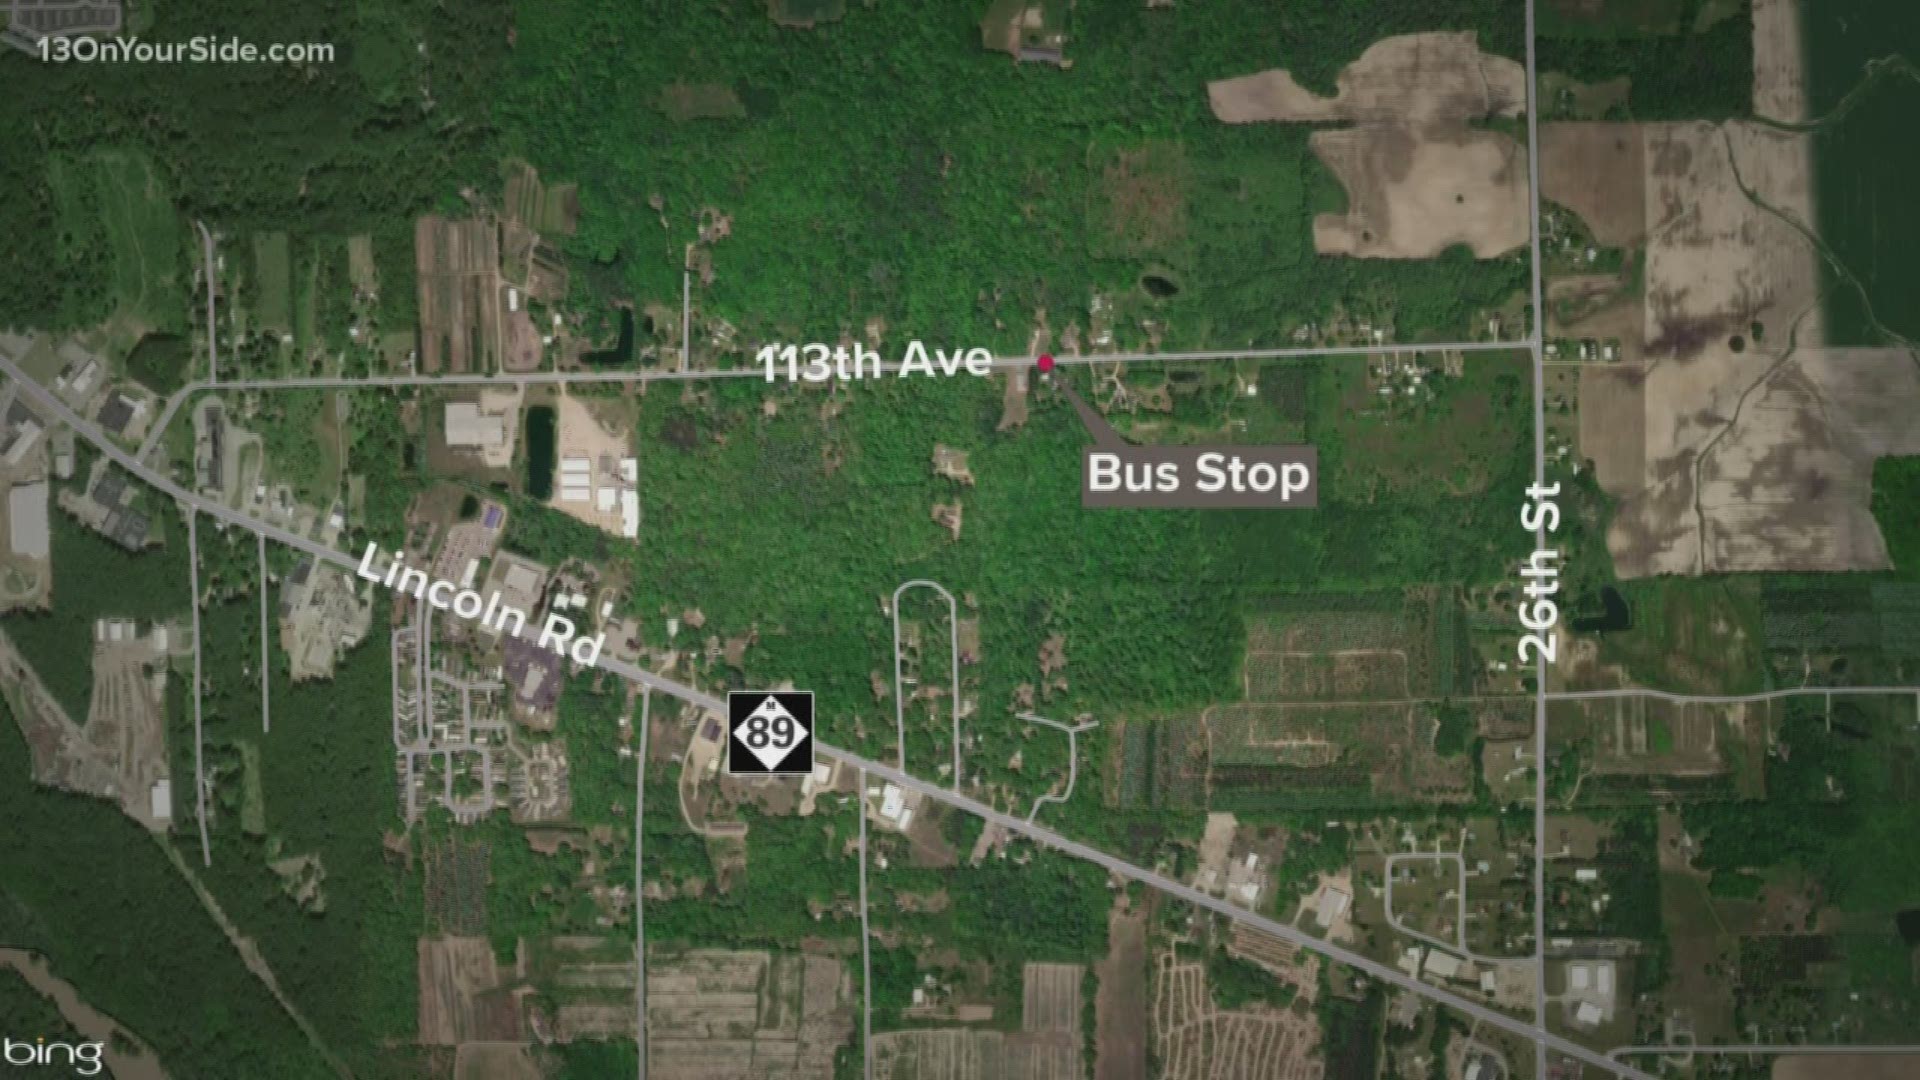 The Allegan County Sheriff's Office said the man was letting the children know that their bus was behind schedule.